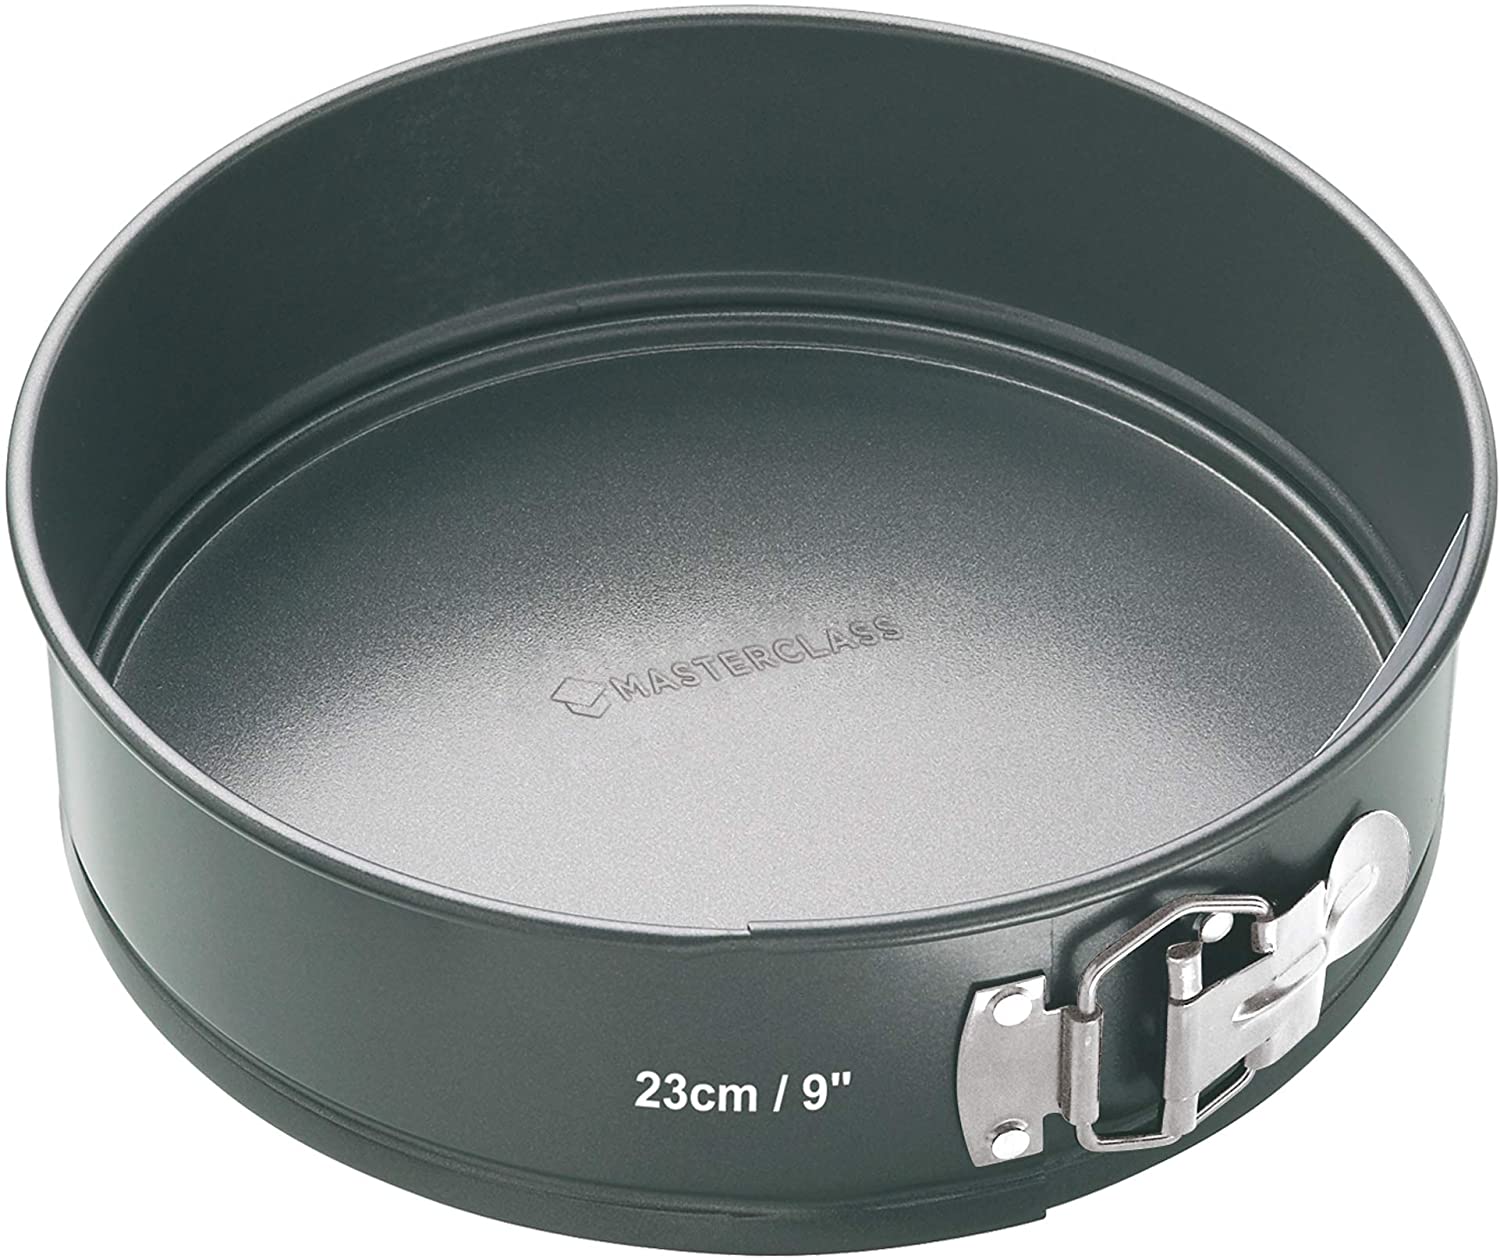 KitchenCraft Master Class 23cm Non-Stick Spring Form Quick Release Cake Pan With Loose Base